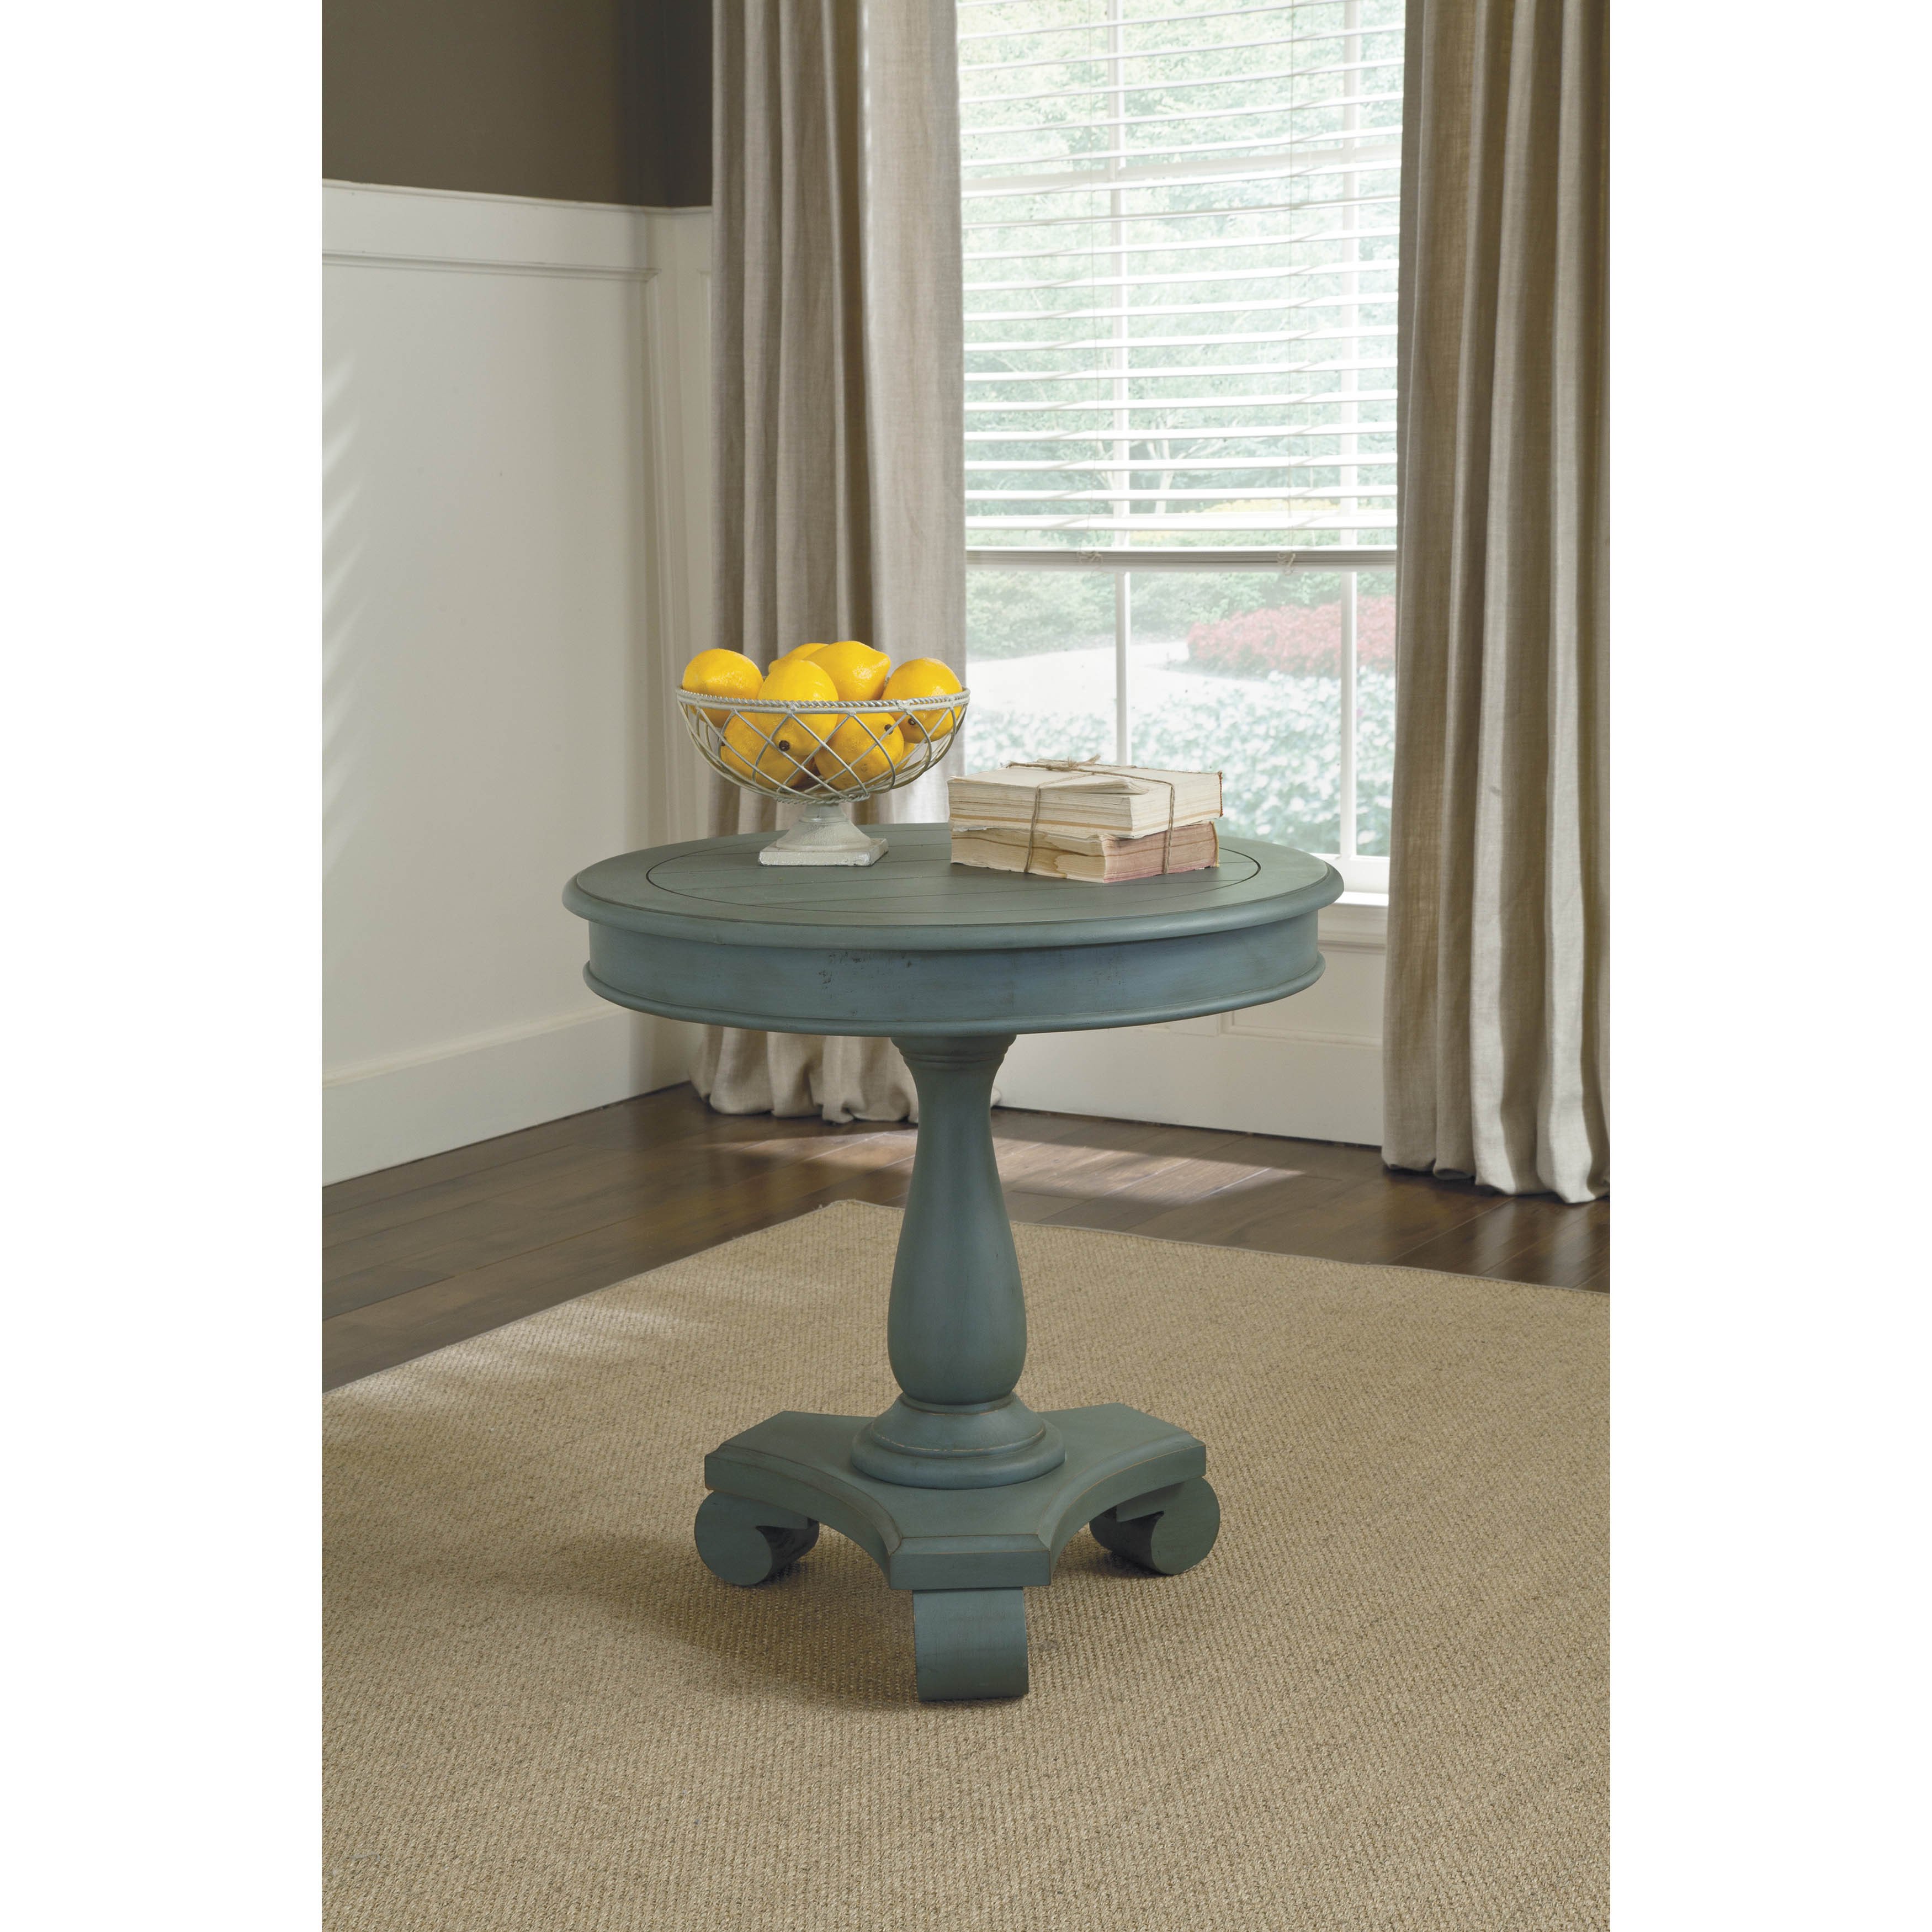 signature design ashley mirimyn soft blue round accent table free shipping today black end tables with storage linon galway white foot console large wall clock next mirrored side